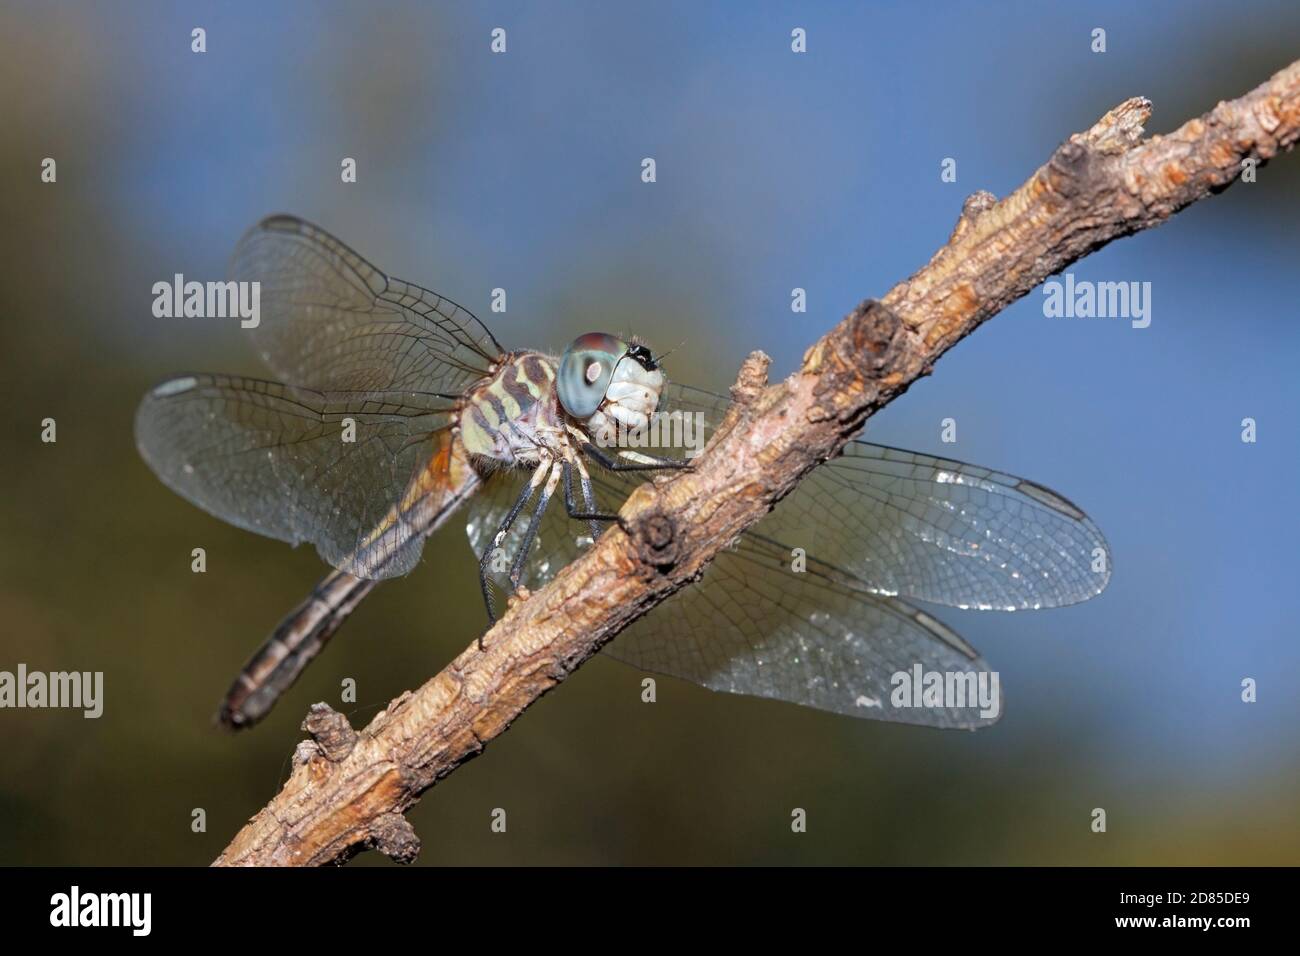 A vibrant blue abdomen, metallic green eyes and brown tinted wings define a  blue dasher dragonfly. It rests on a branch in the open blue sky. Stock Photo